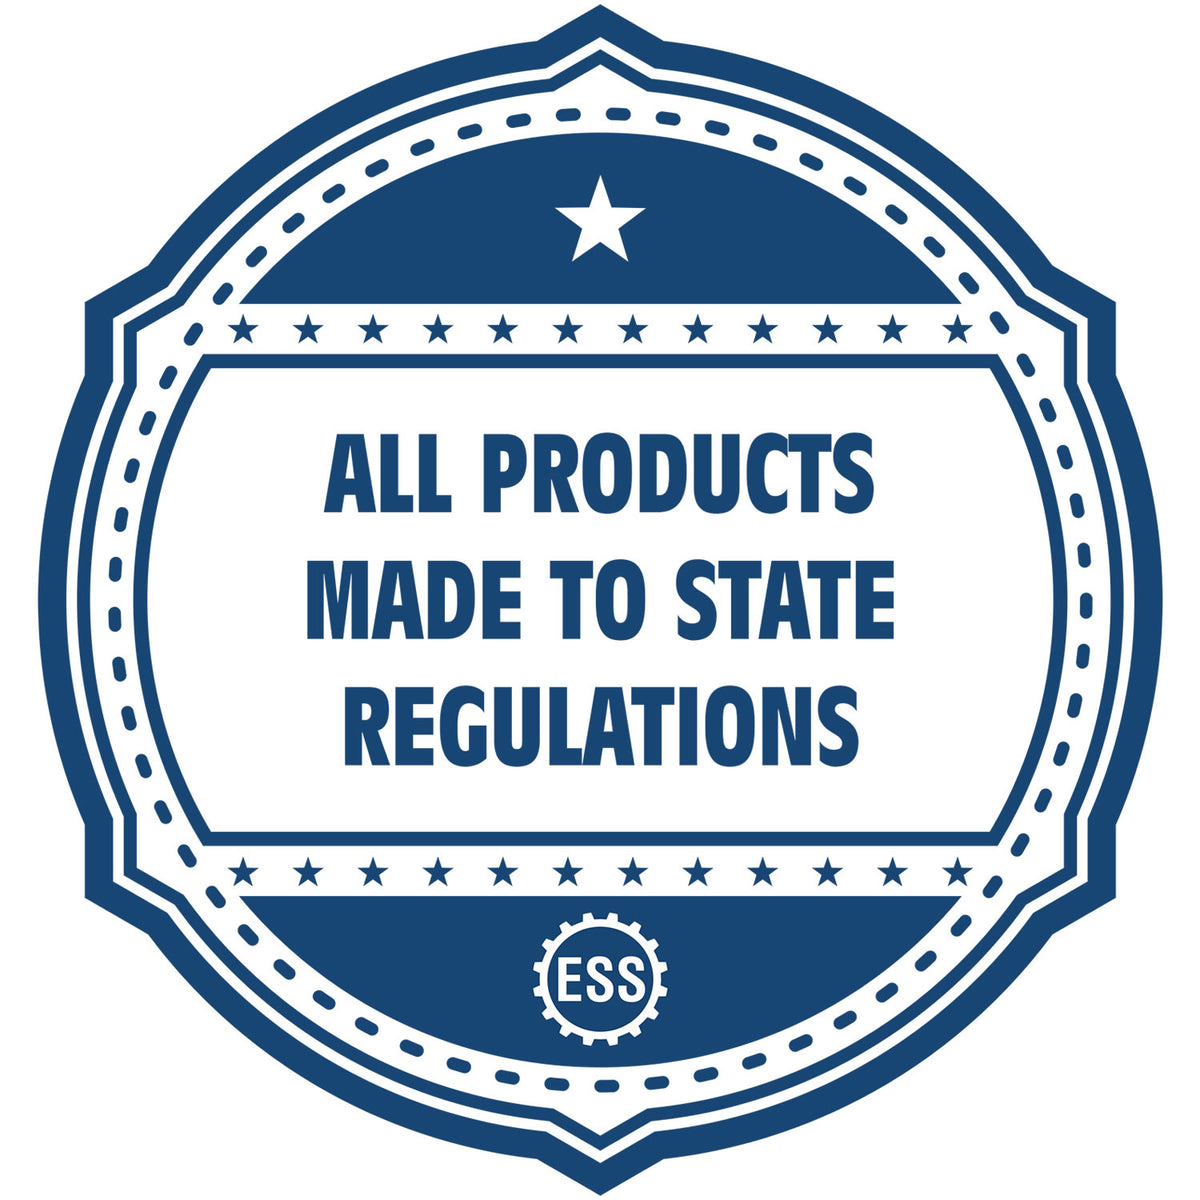 An icon or badge element for the Self-Inking Rectangular Oregon Notary Stamp showing that this product is made in compliance with state regulations.